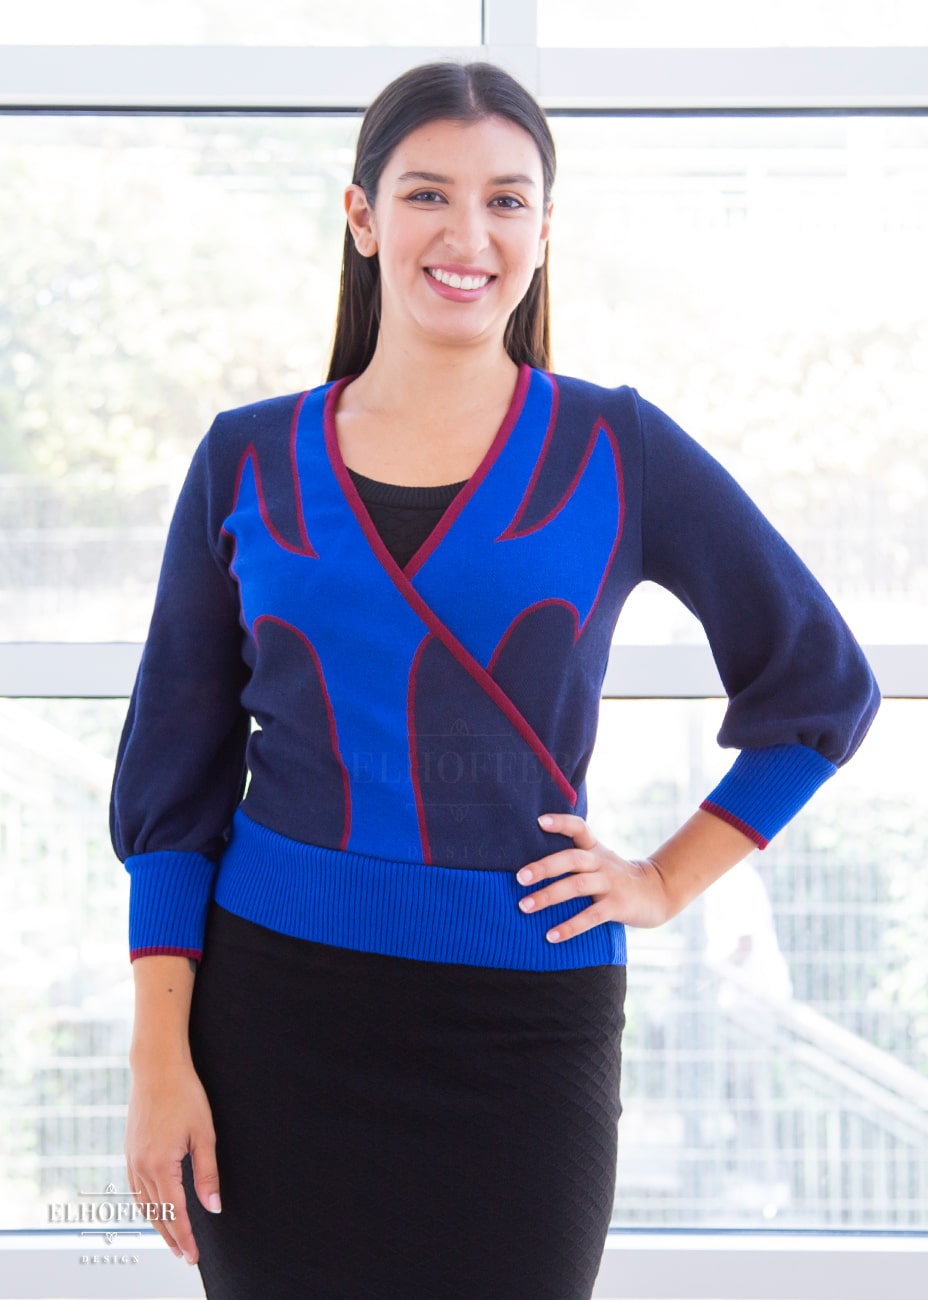 Alexandra, an olive skinned size small model with long brown hair, is wearing a crossover knit crop top. The base is a dark blue, details are bright blue with a red outline and form almost a t shape in the middle of the crop. The cuffs and bottom are the same bright blue of the detail and the crossover is piped in the same red.